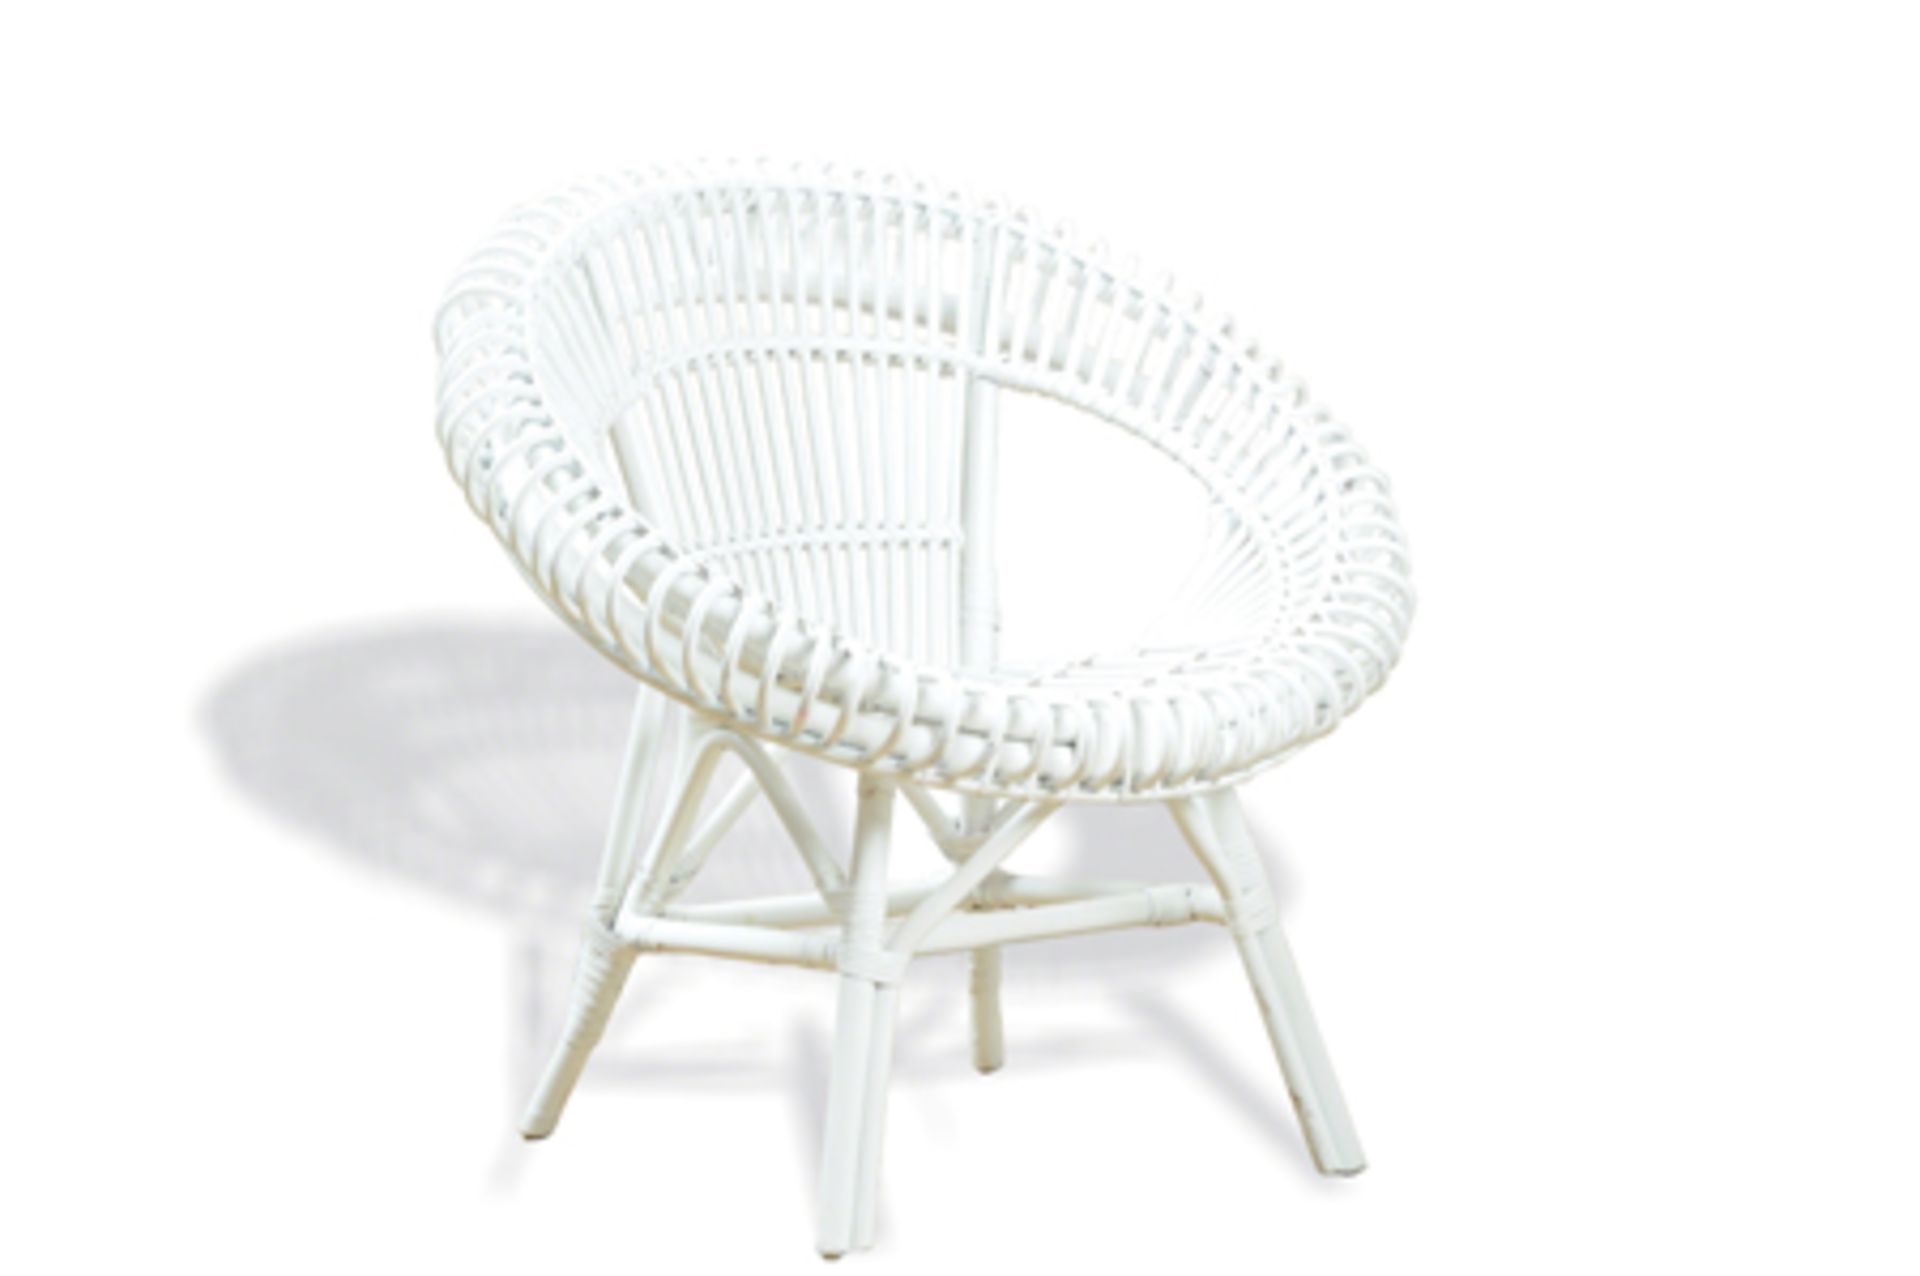 Matahari Chair White (sold without cushion) a rattan chair made from natural rattan material - Image 3 of 3